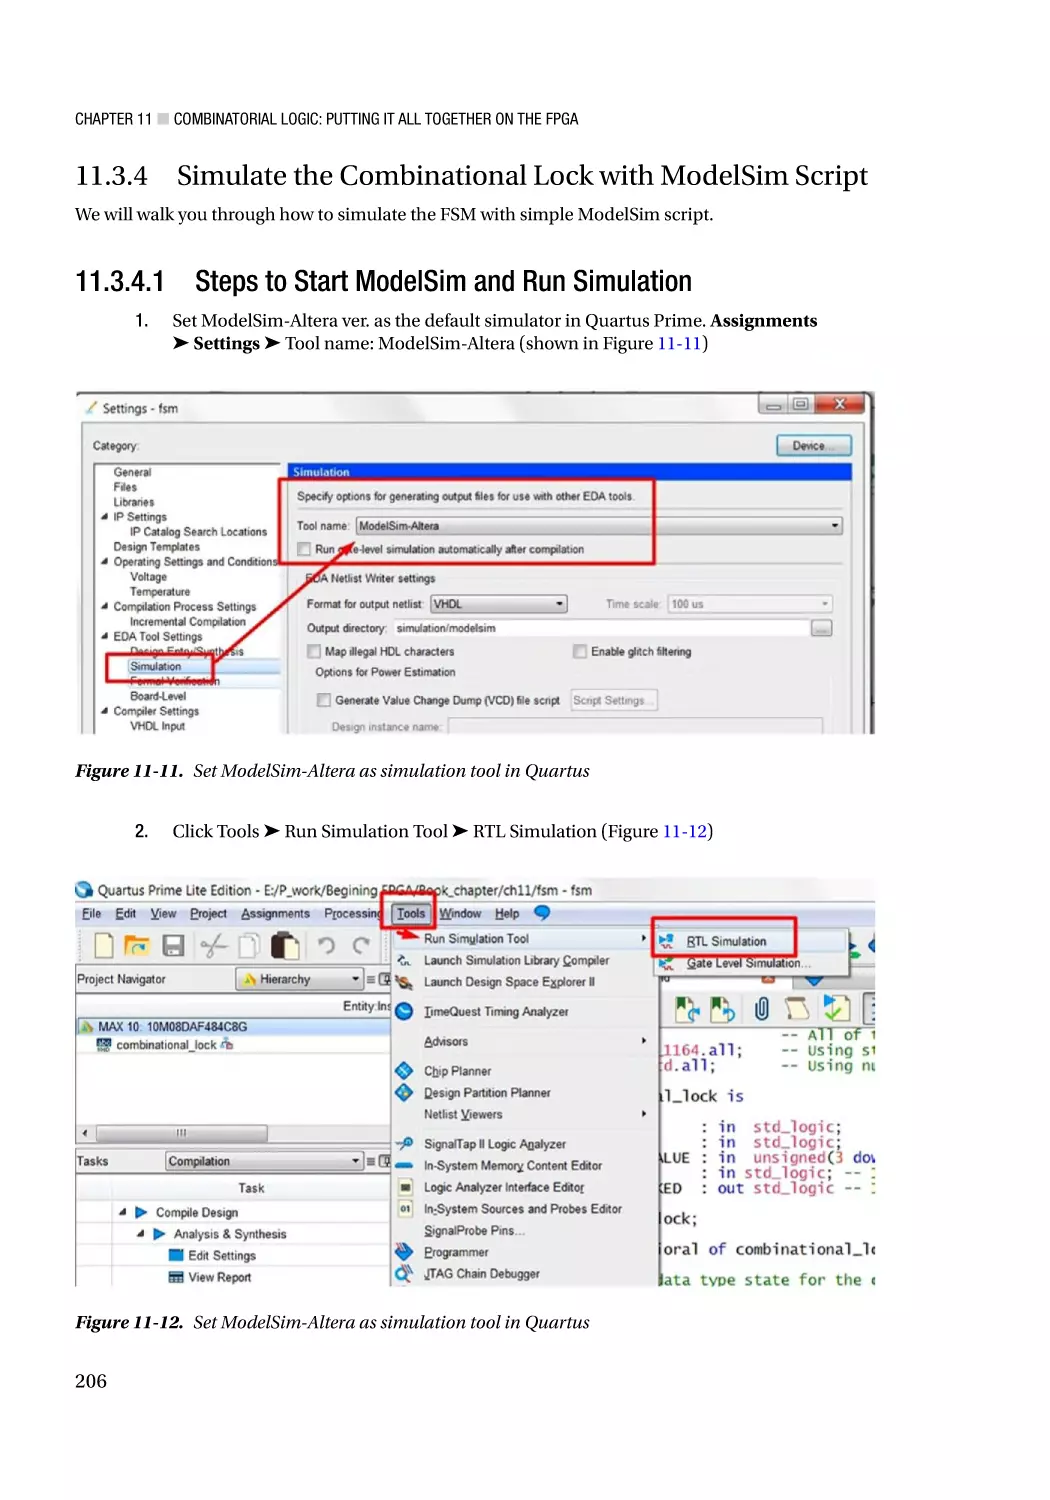 11.3.4 Simulate the Combinational Lock with ModelSim Script
11.3.4.1 Steps to Start ModelSim and Run Simulation